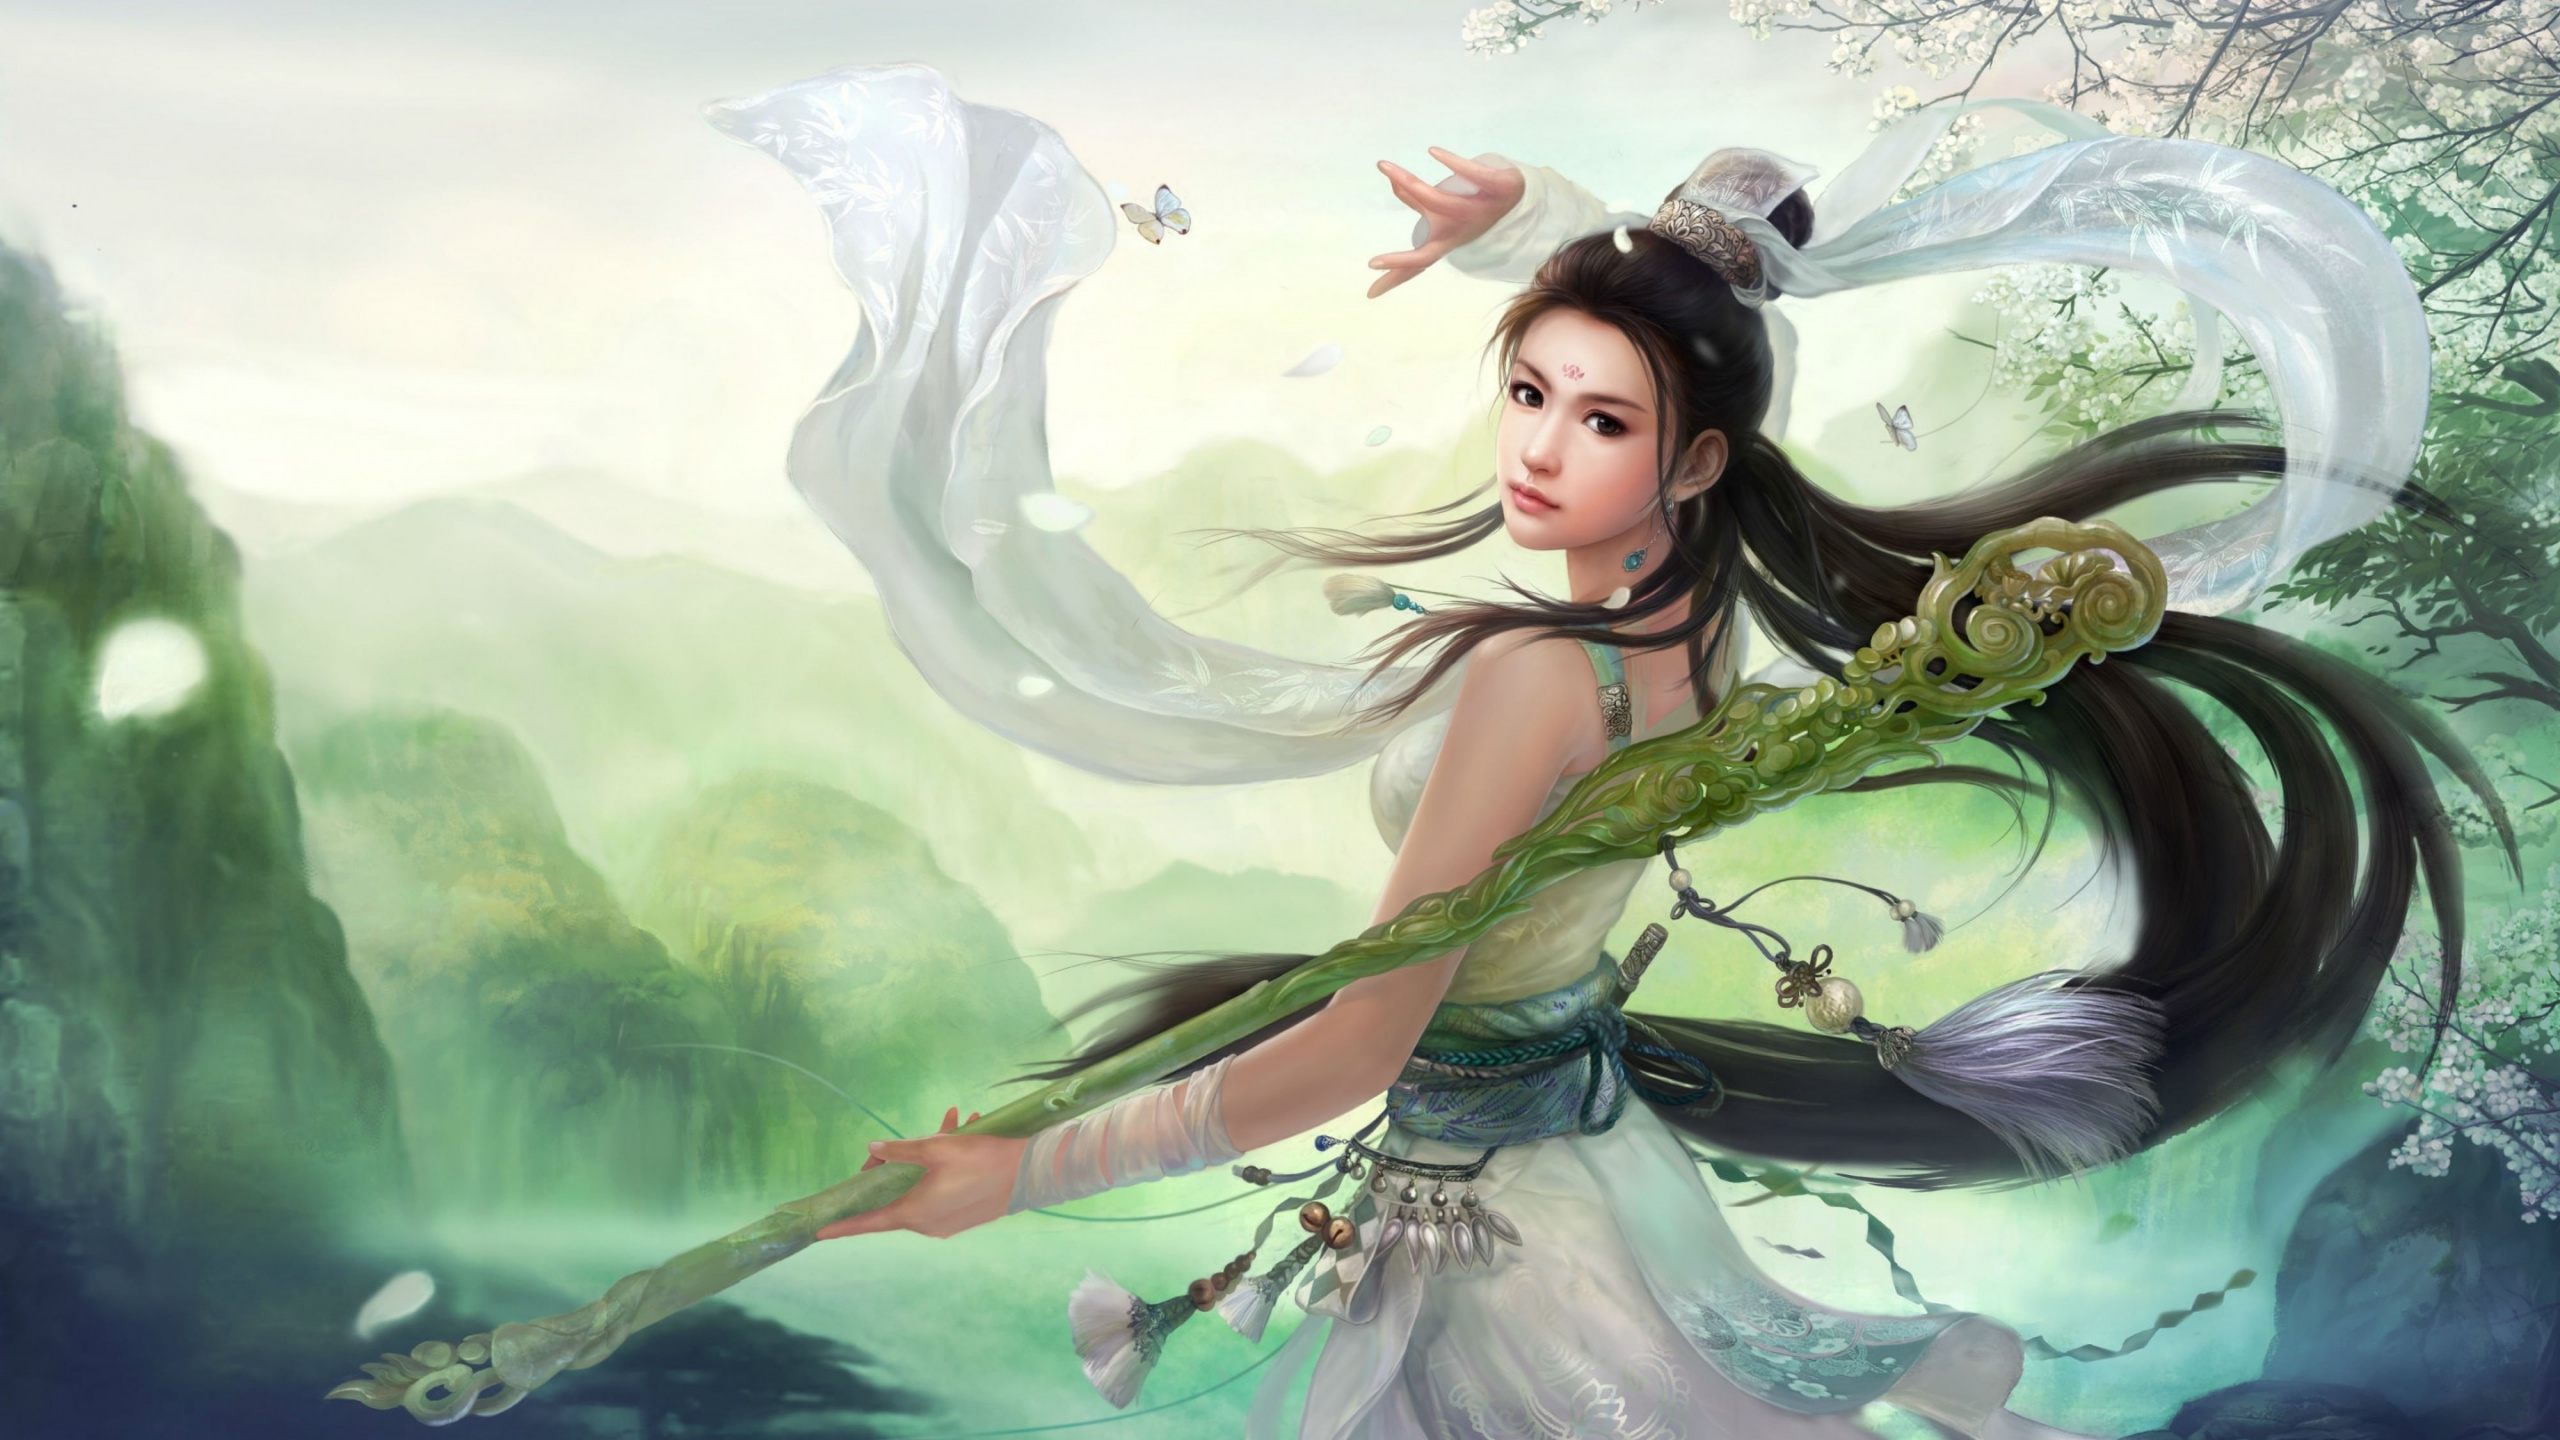 Woman in Green Dress With White Wings Illustration. Wallpaper in 2560x1440 Resolution